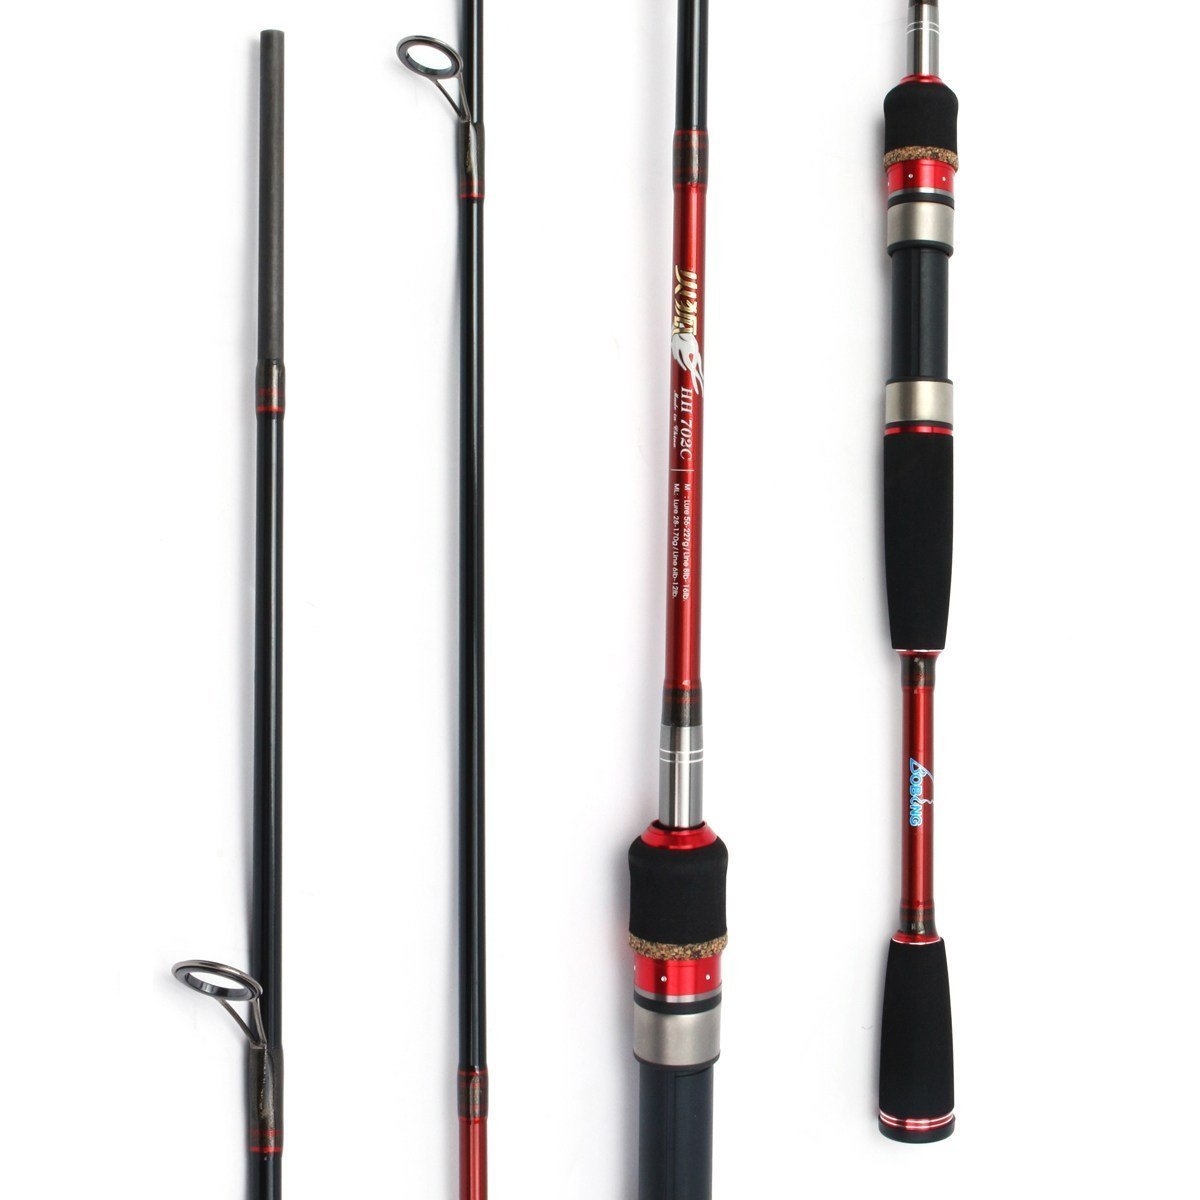 Bobing Brand Lure Rod 2 Tips M/Ml Power 2.1M 2 Sections Carbon Fishing Rod-Spinning Rods-Haofang Outdoor Store-Bargain Bait Box